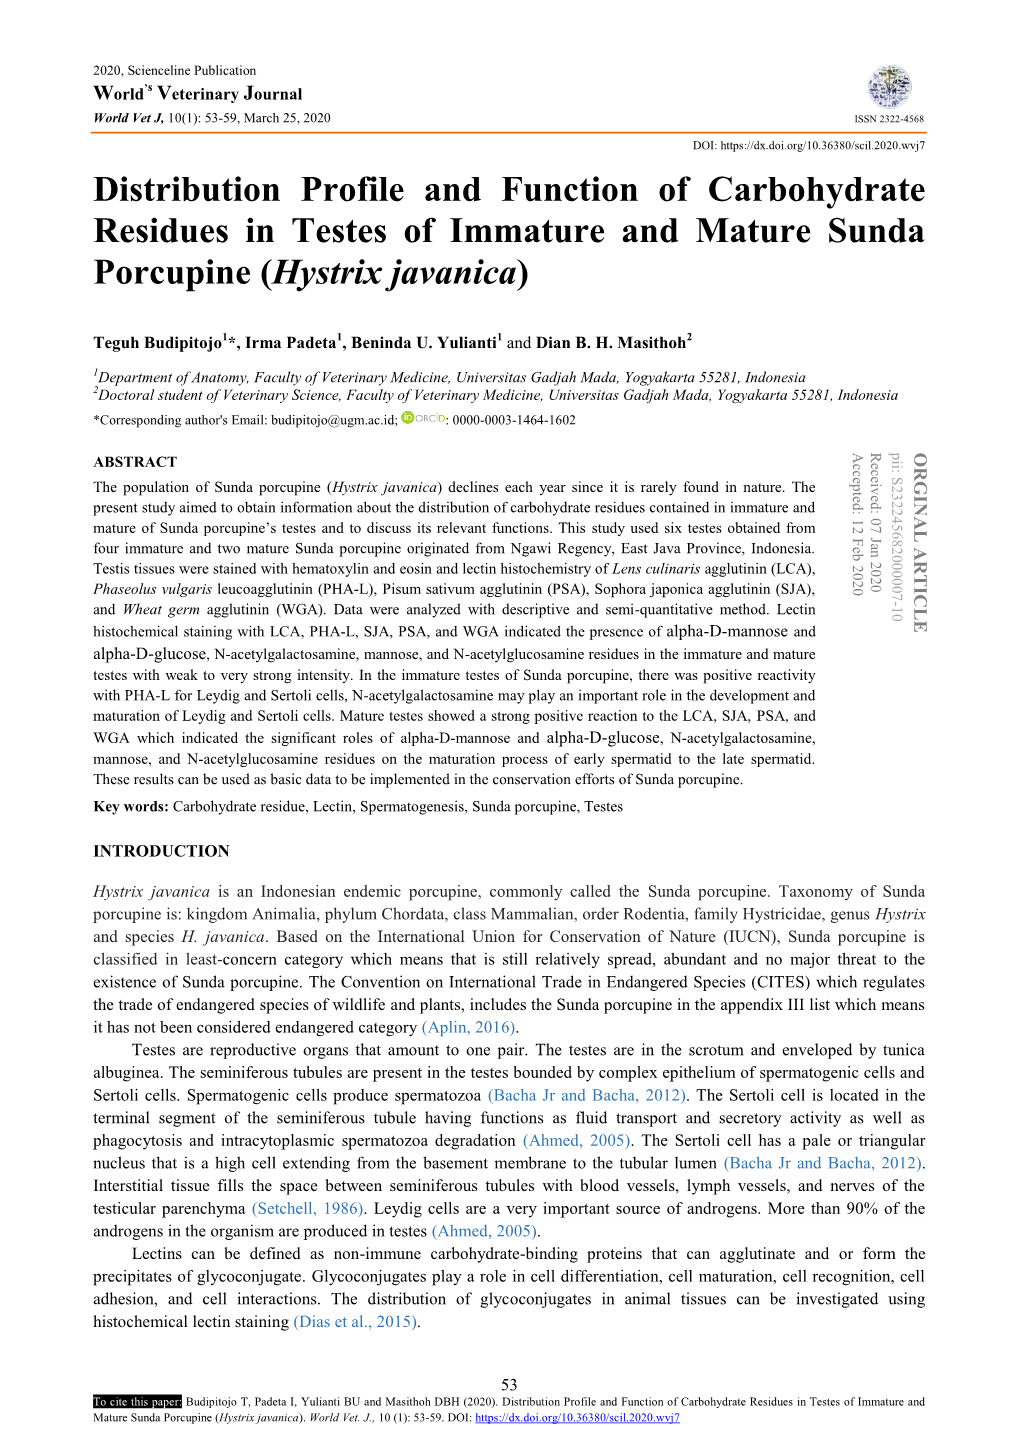 Distribution Profile and Function of Carbohydrate Residues in Testes of Immature and Mature Sunda Porcupine (Hystrix Javanica)